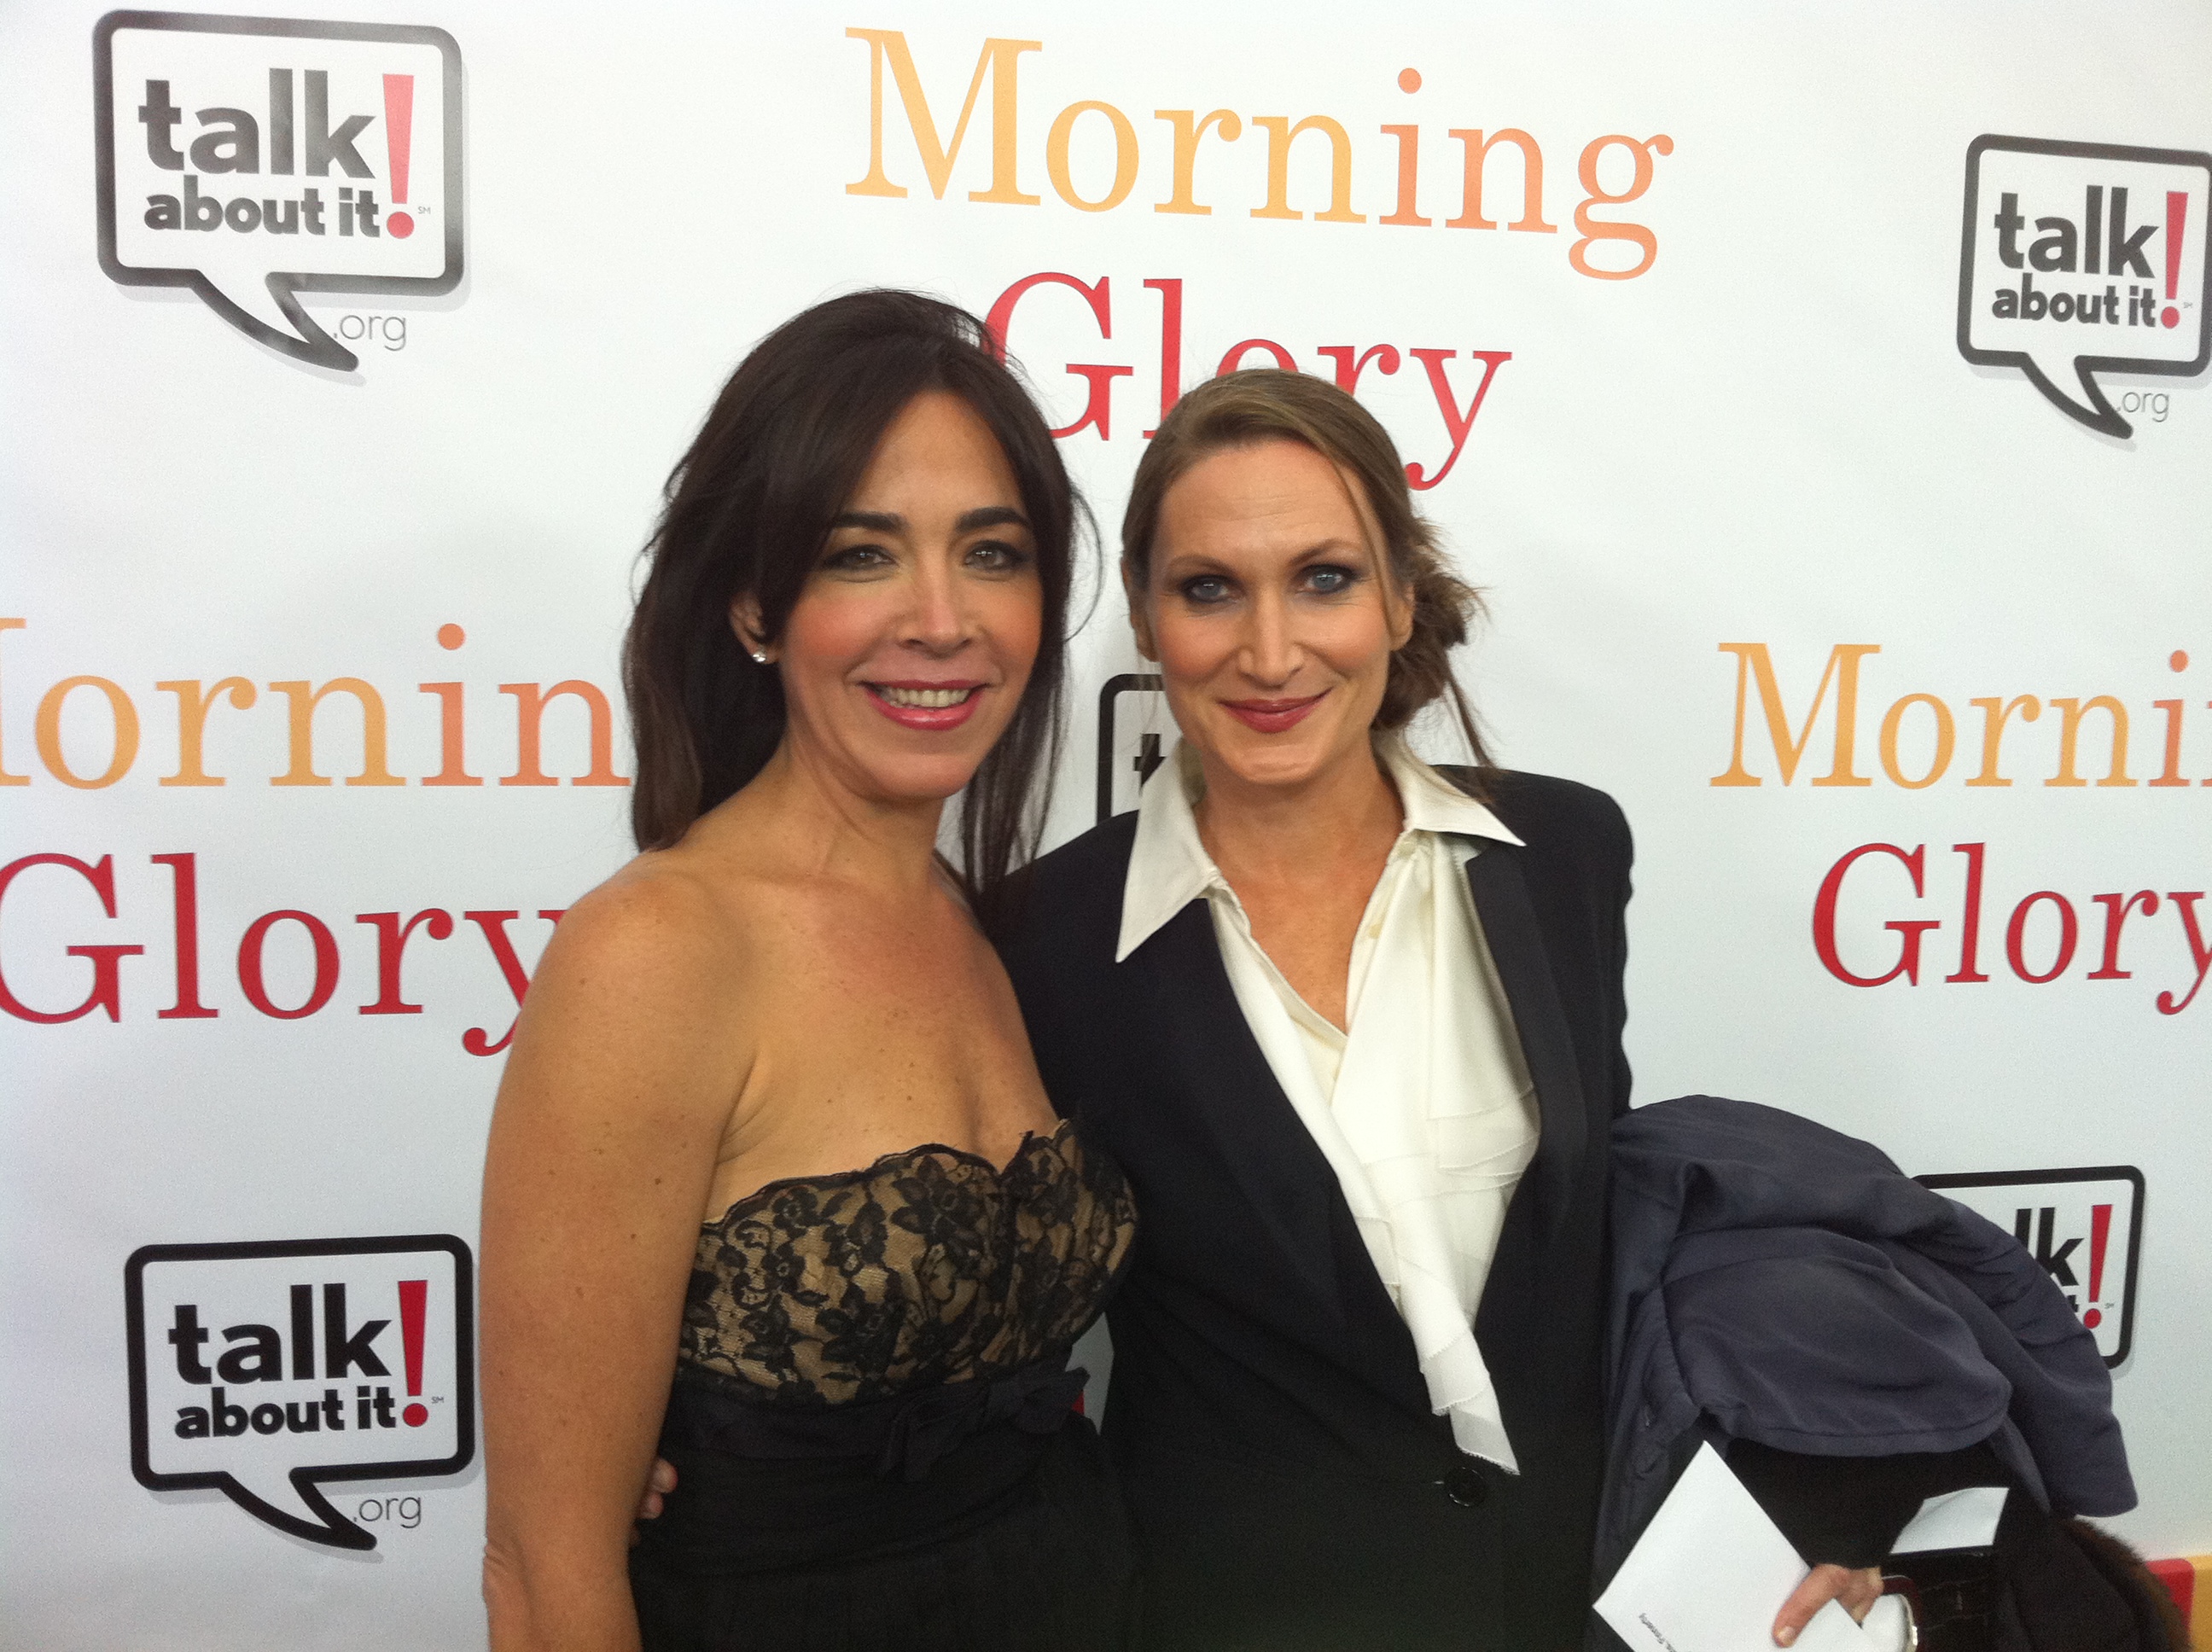 Finnerty Steeves and Kelli Joan Bennett on the red carpet at the Morning Glory premiere in New York City